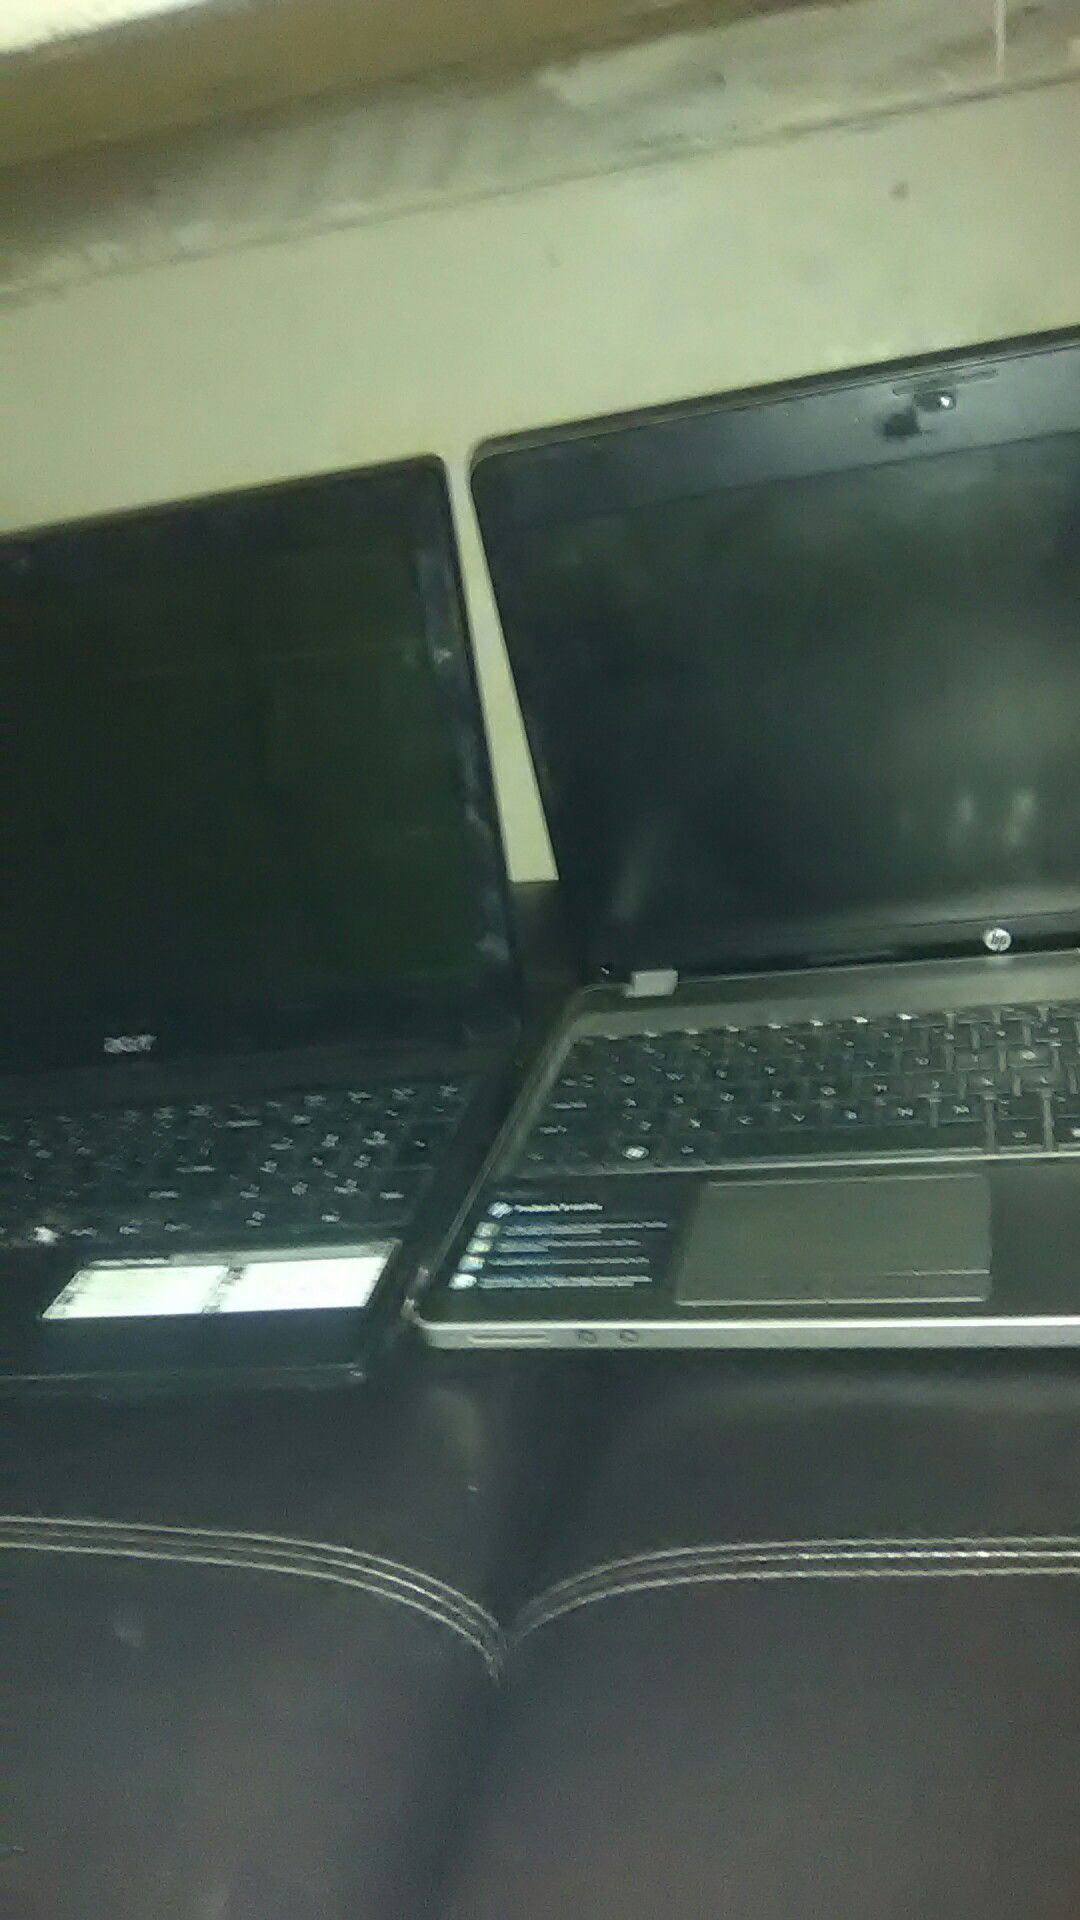 HP and Acer laptop